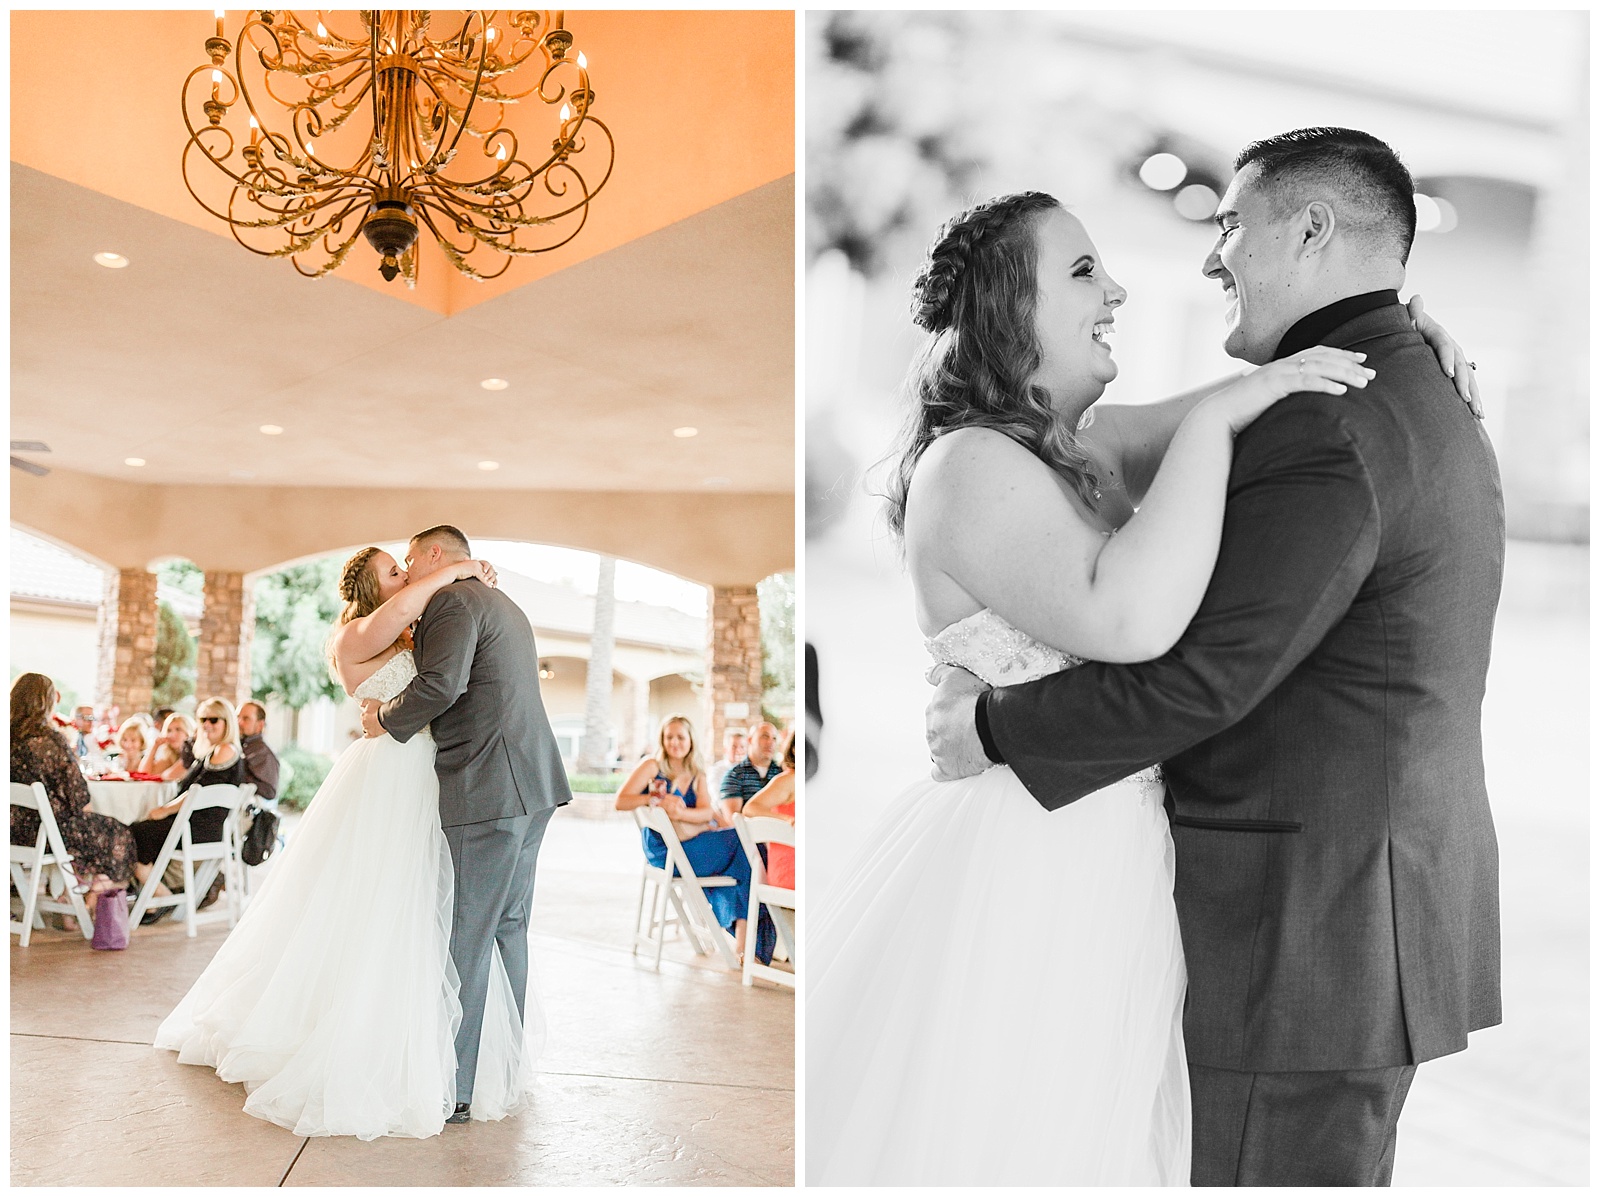 first dances at a wedding with the bride and groom